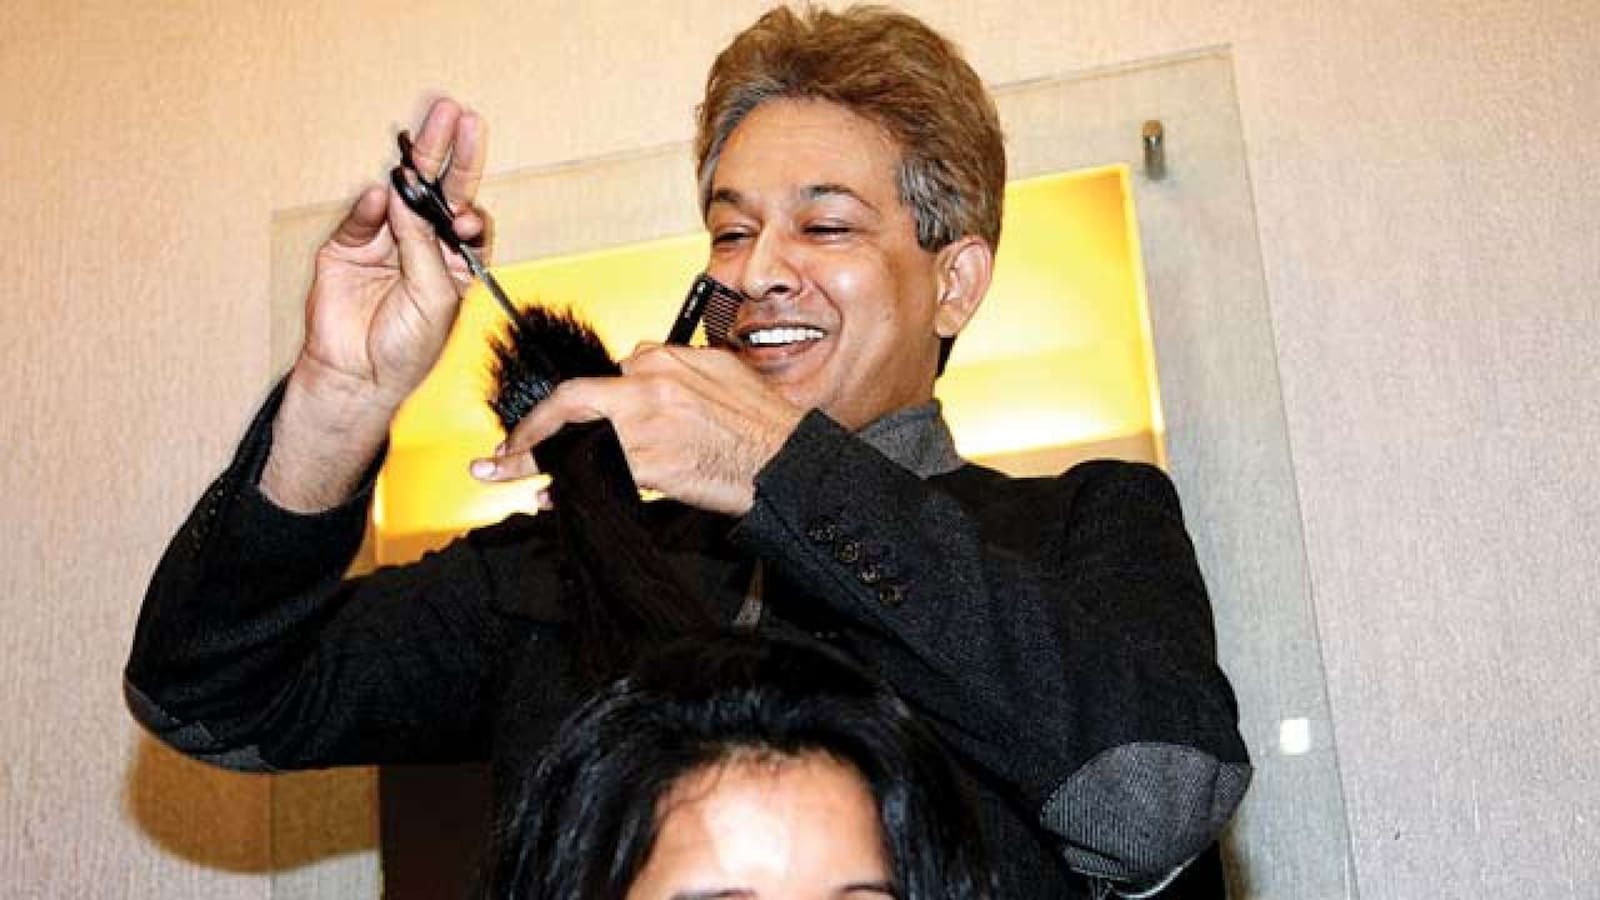 Hair stylist Jawed Habib wants to become the Tesco of his industry